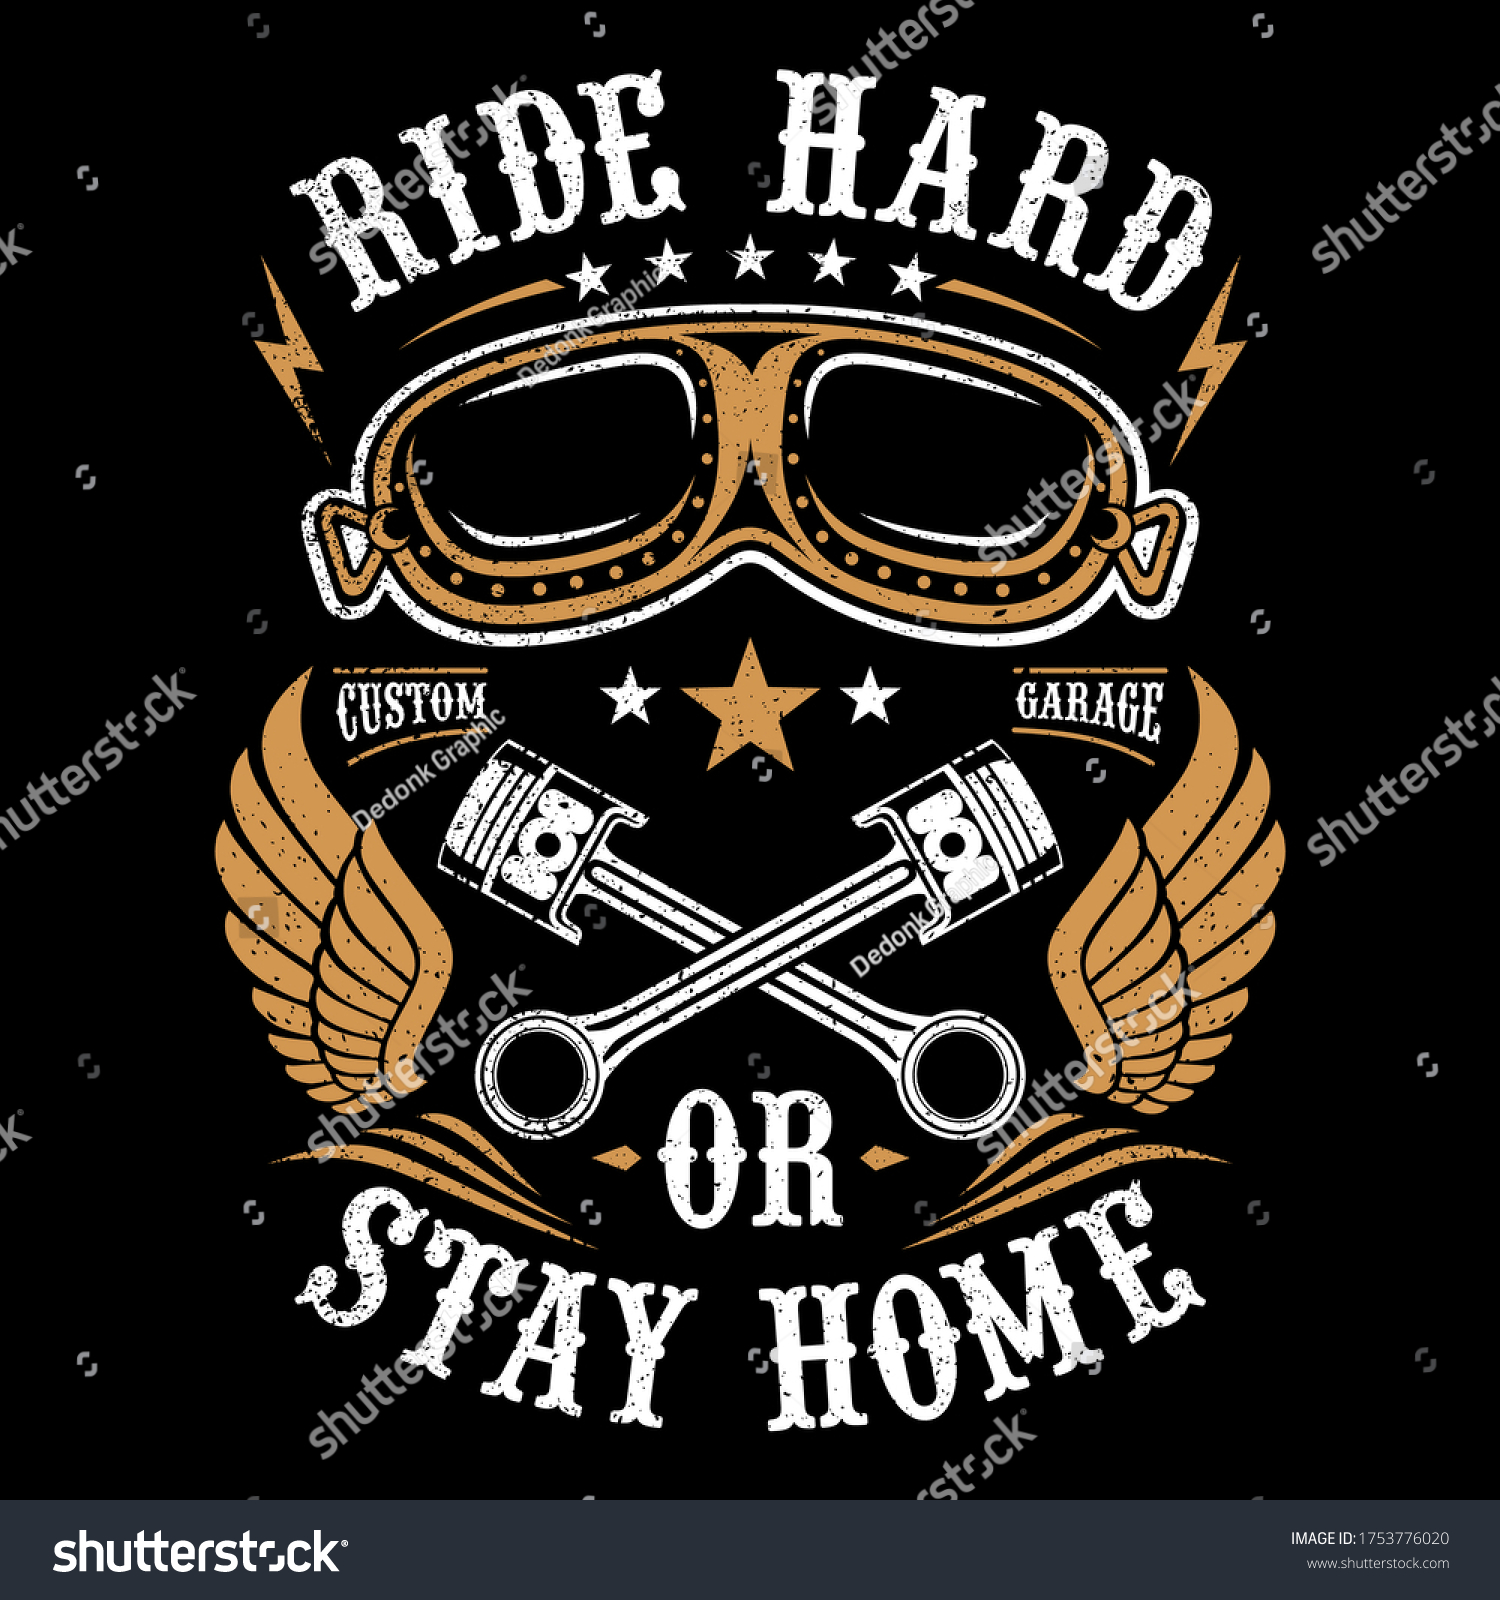 Illustration Biker Design With Quote Ride Hard Royalty Free Stock Vector 1753776020